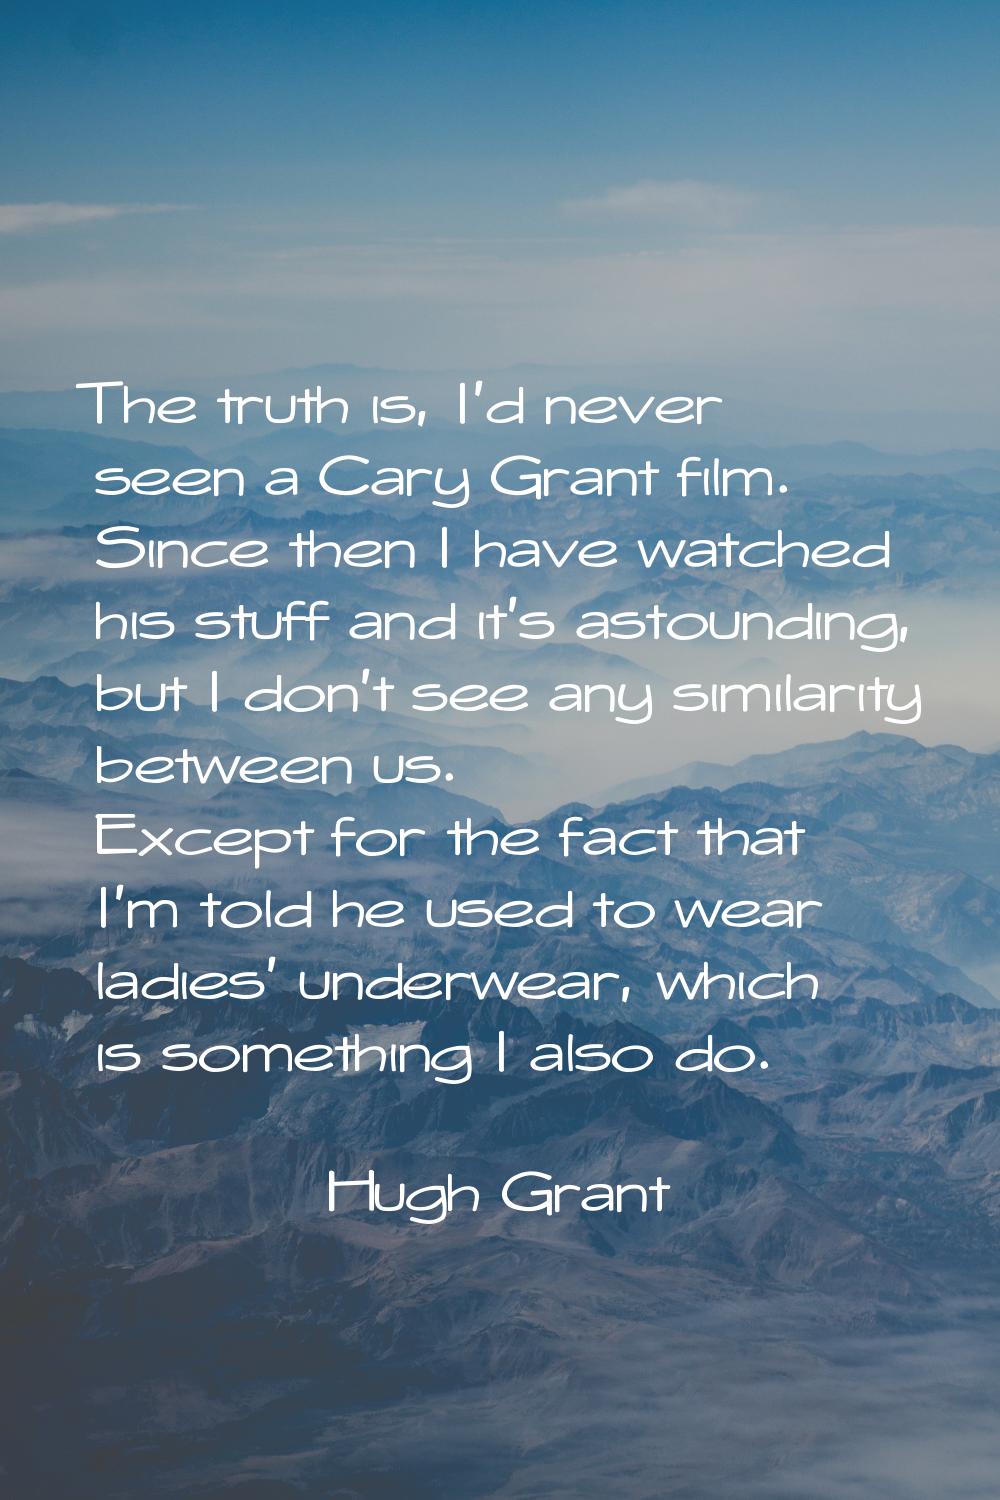 The truth is, I'd never seen a Cary Grant film. Since then I have watched his stuff and it's astoun